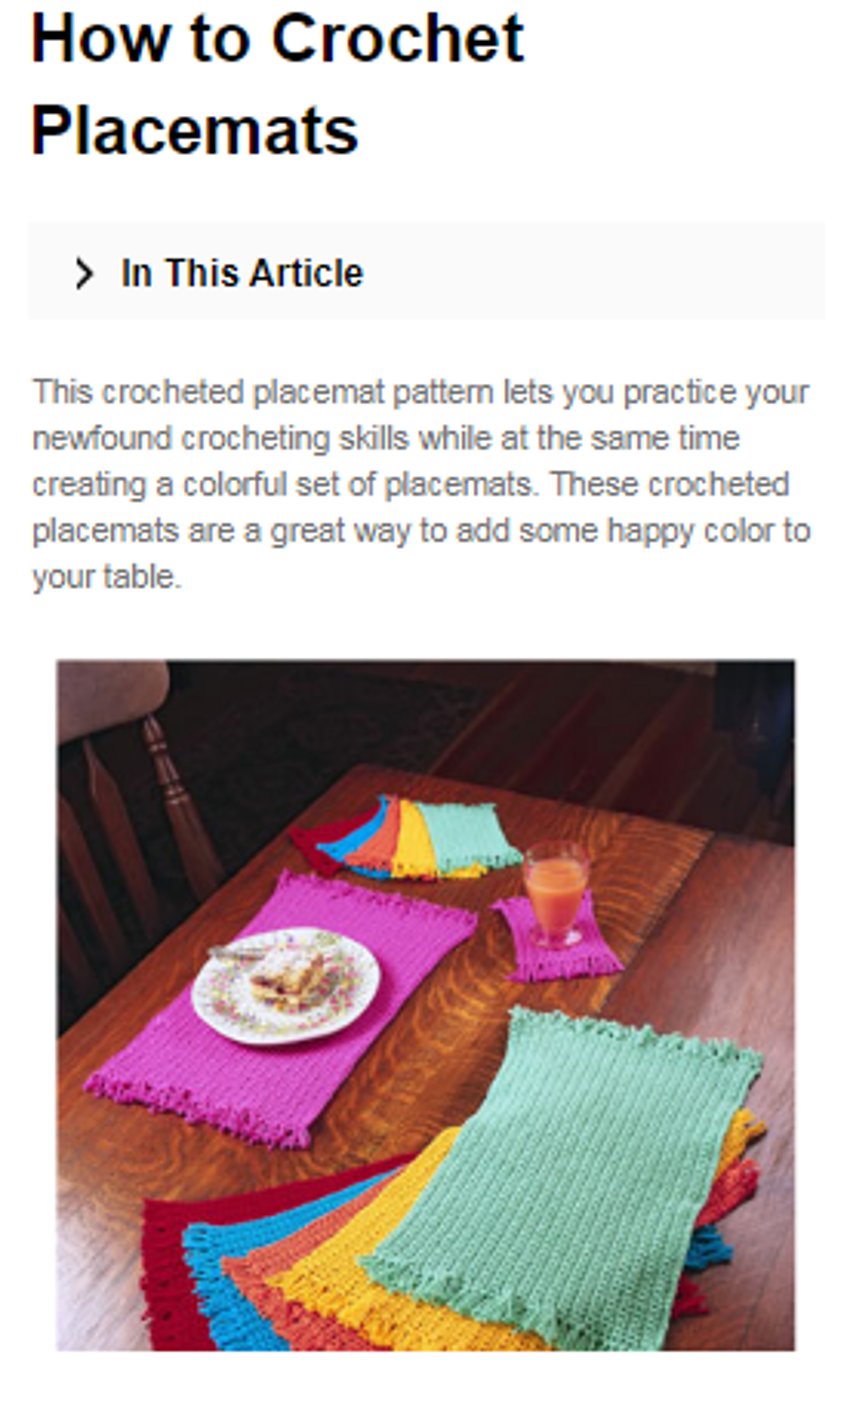 check out the full post [here](https://www.dummies.com/crafts/crocheting/projects/how-to-crochet-placemats/)